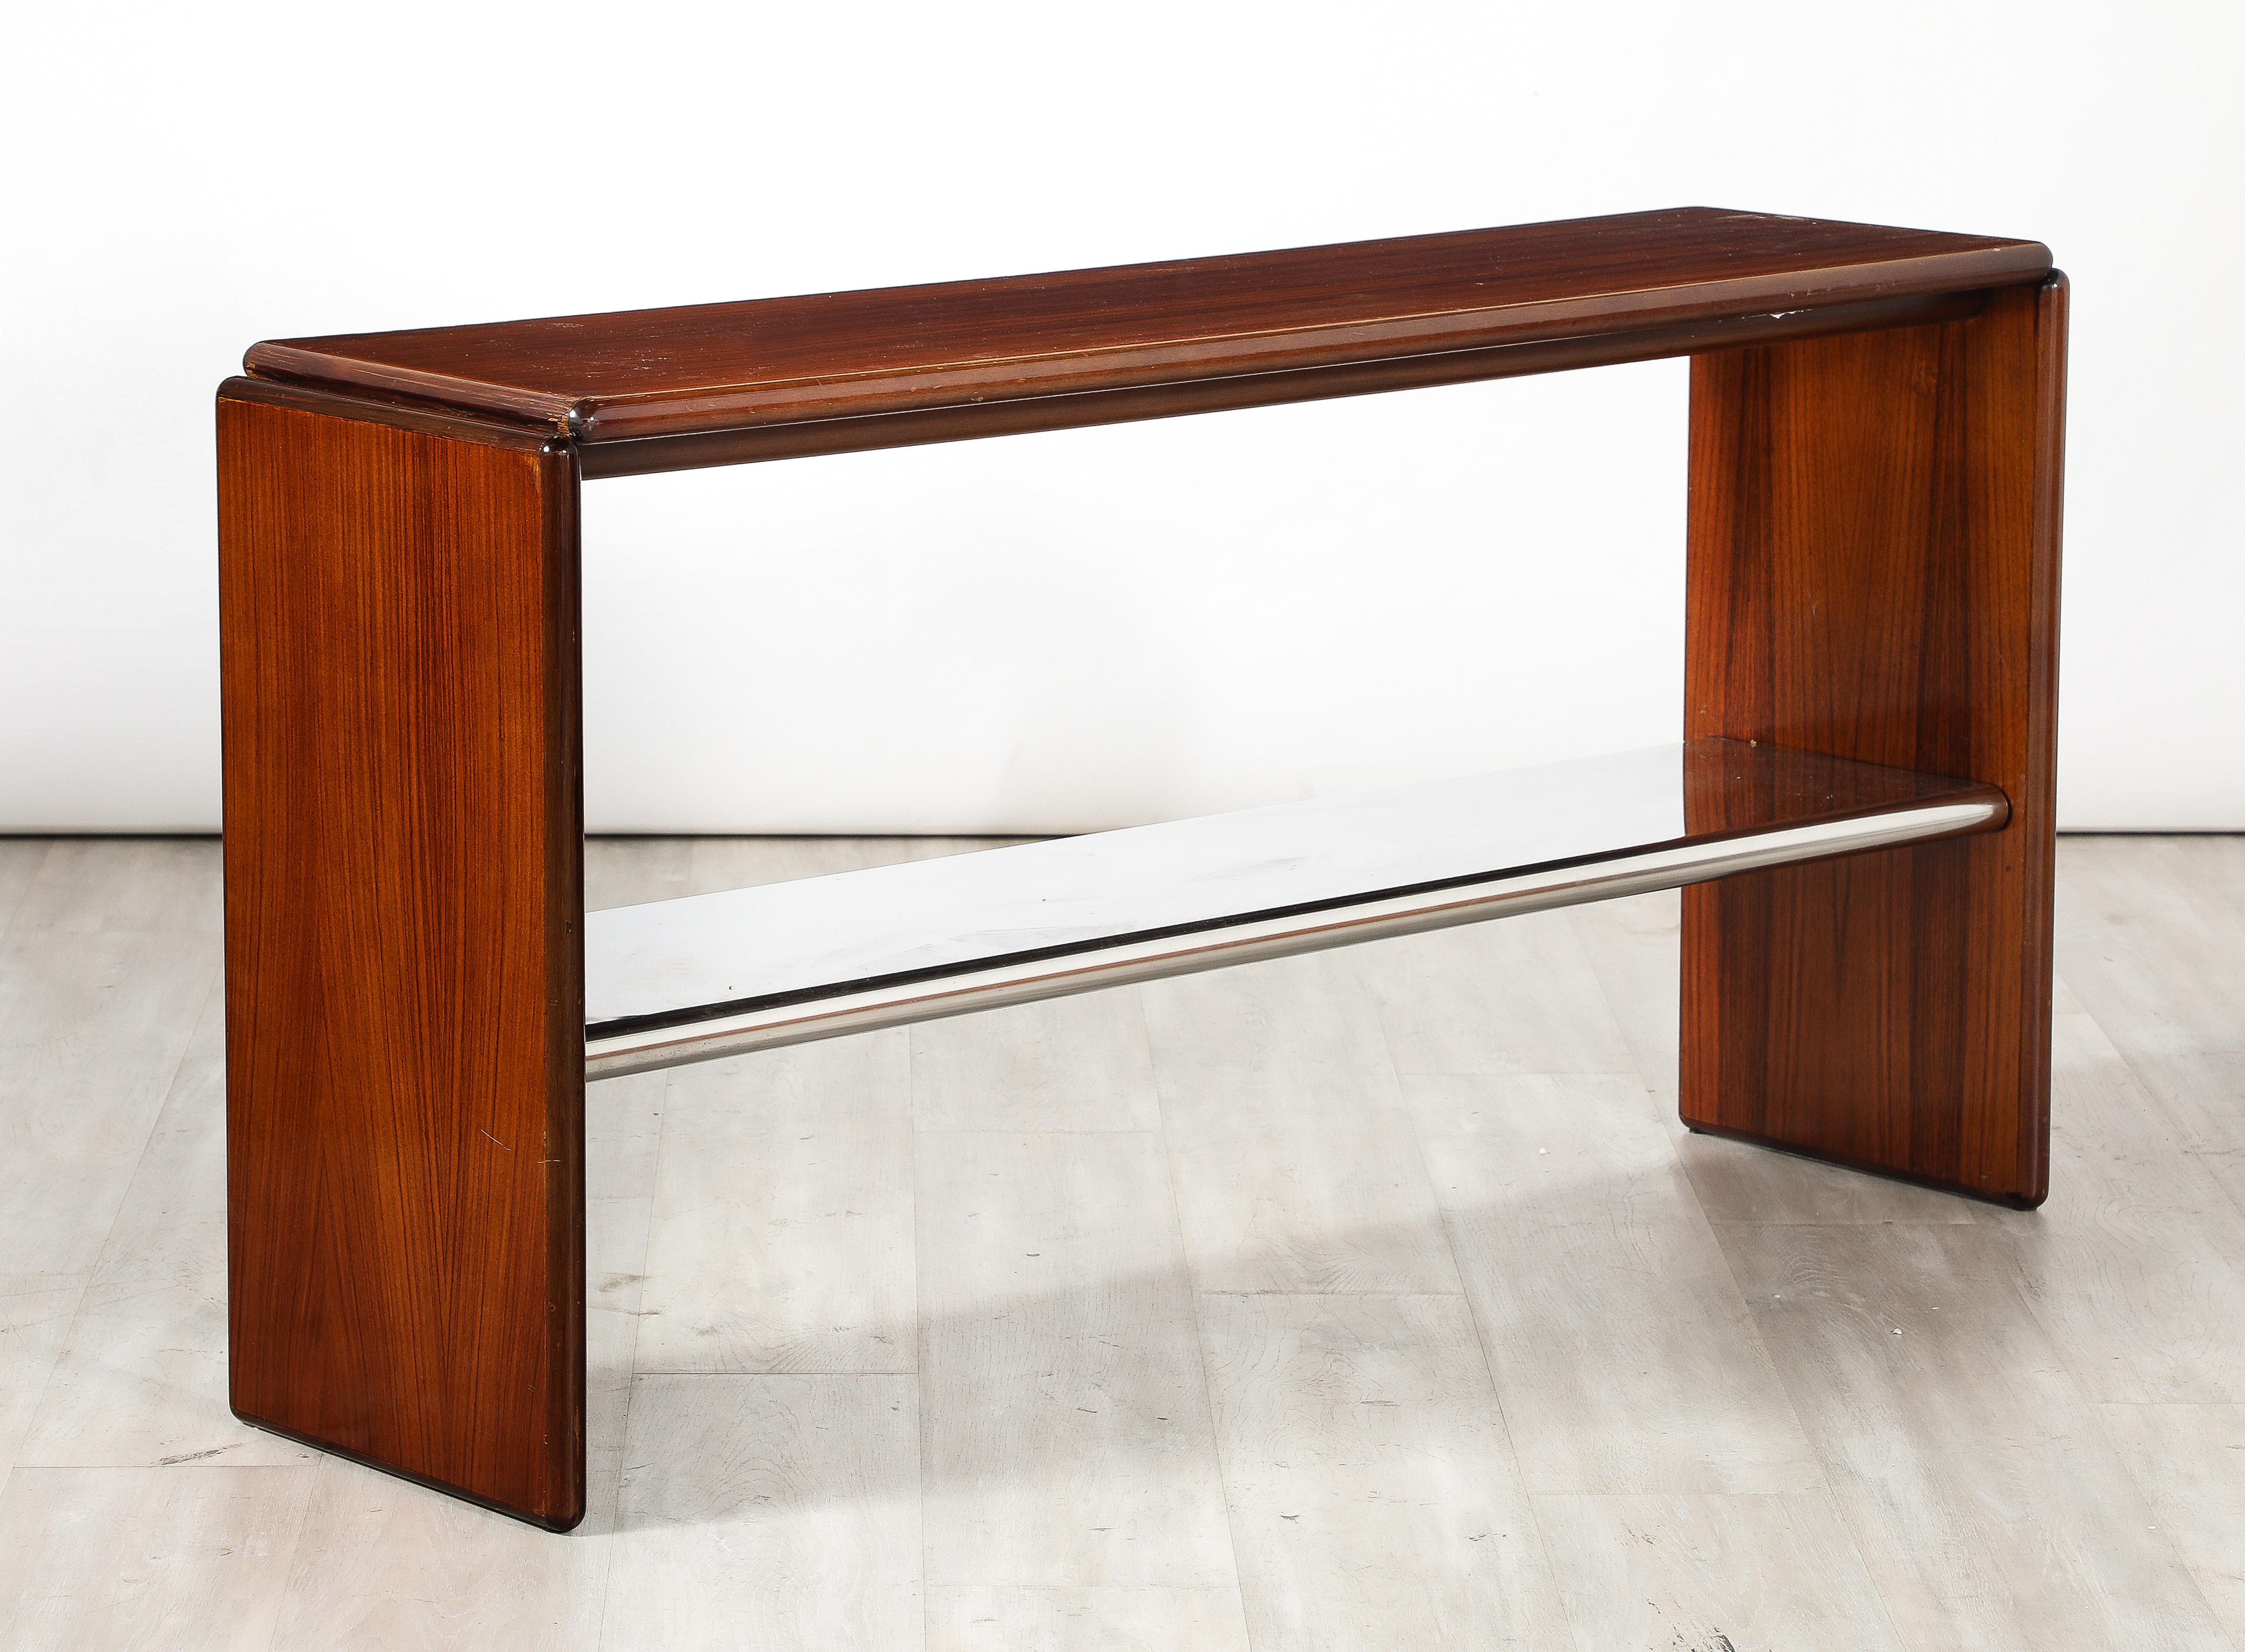 Italian Modernist Wood and Chrome Console Table, Italy, circa 1960 For Sale 1